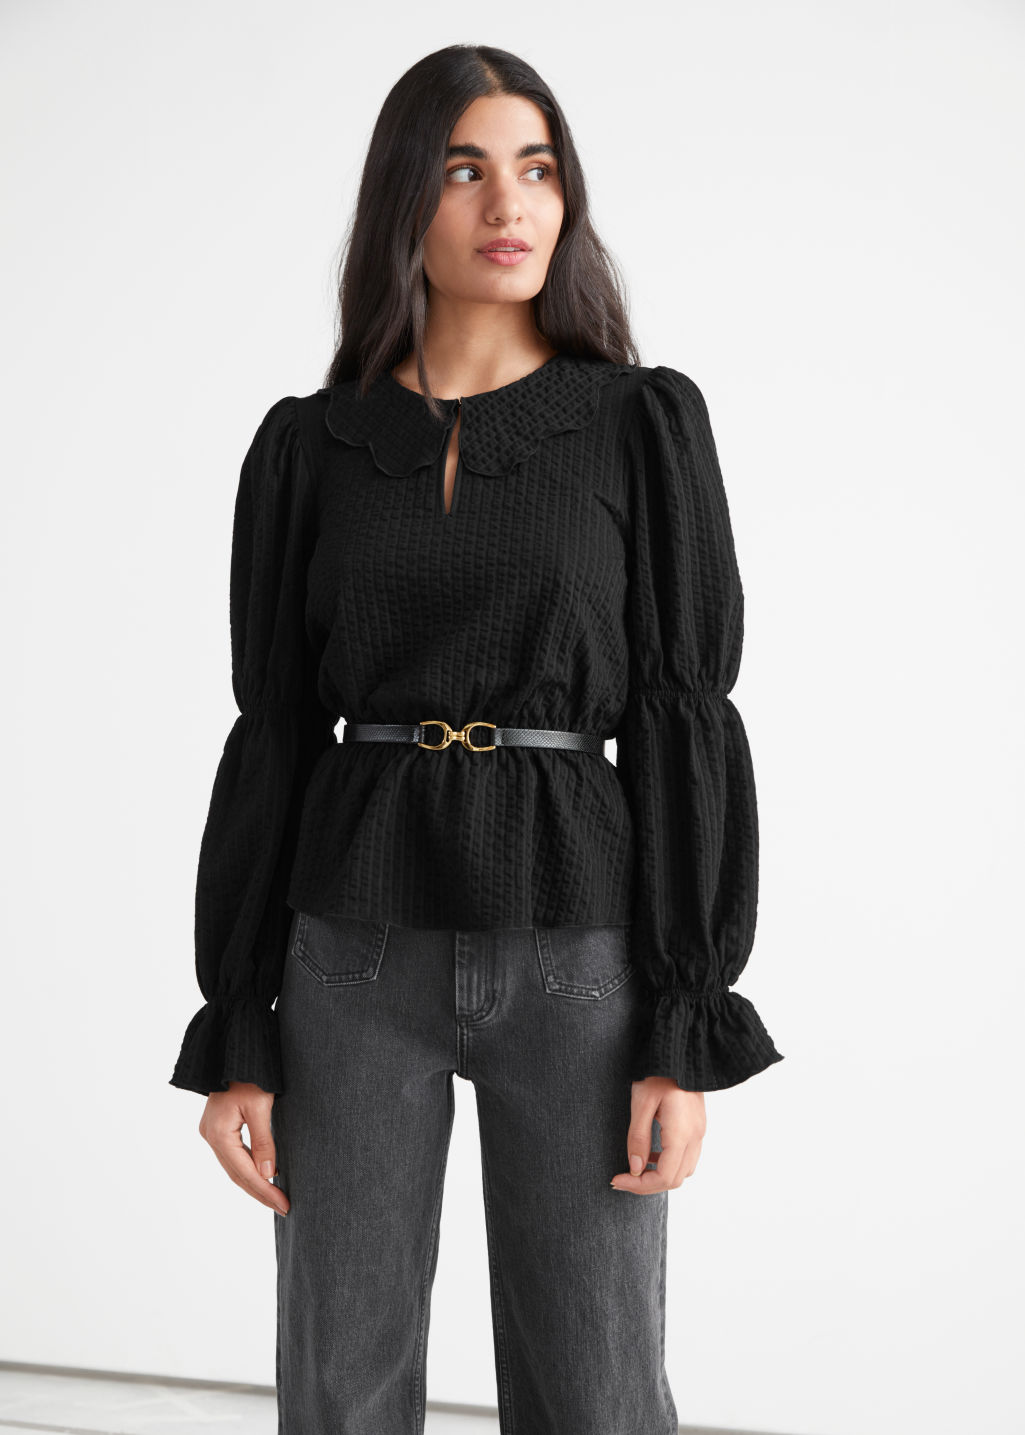 Waffled Scallop Collar Top - Black - Tops & T-shirts - & Other Stories